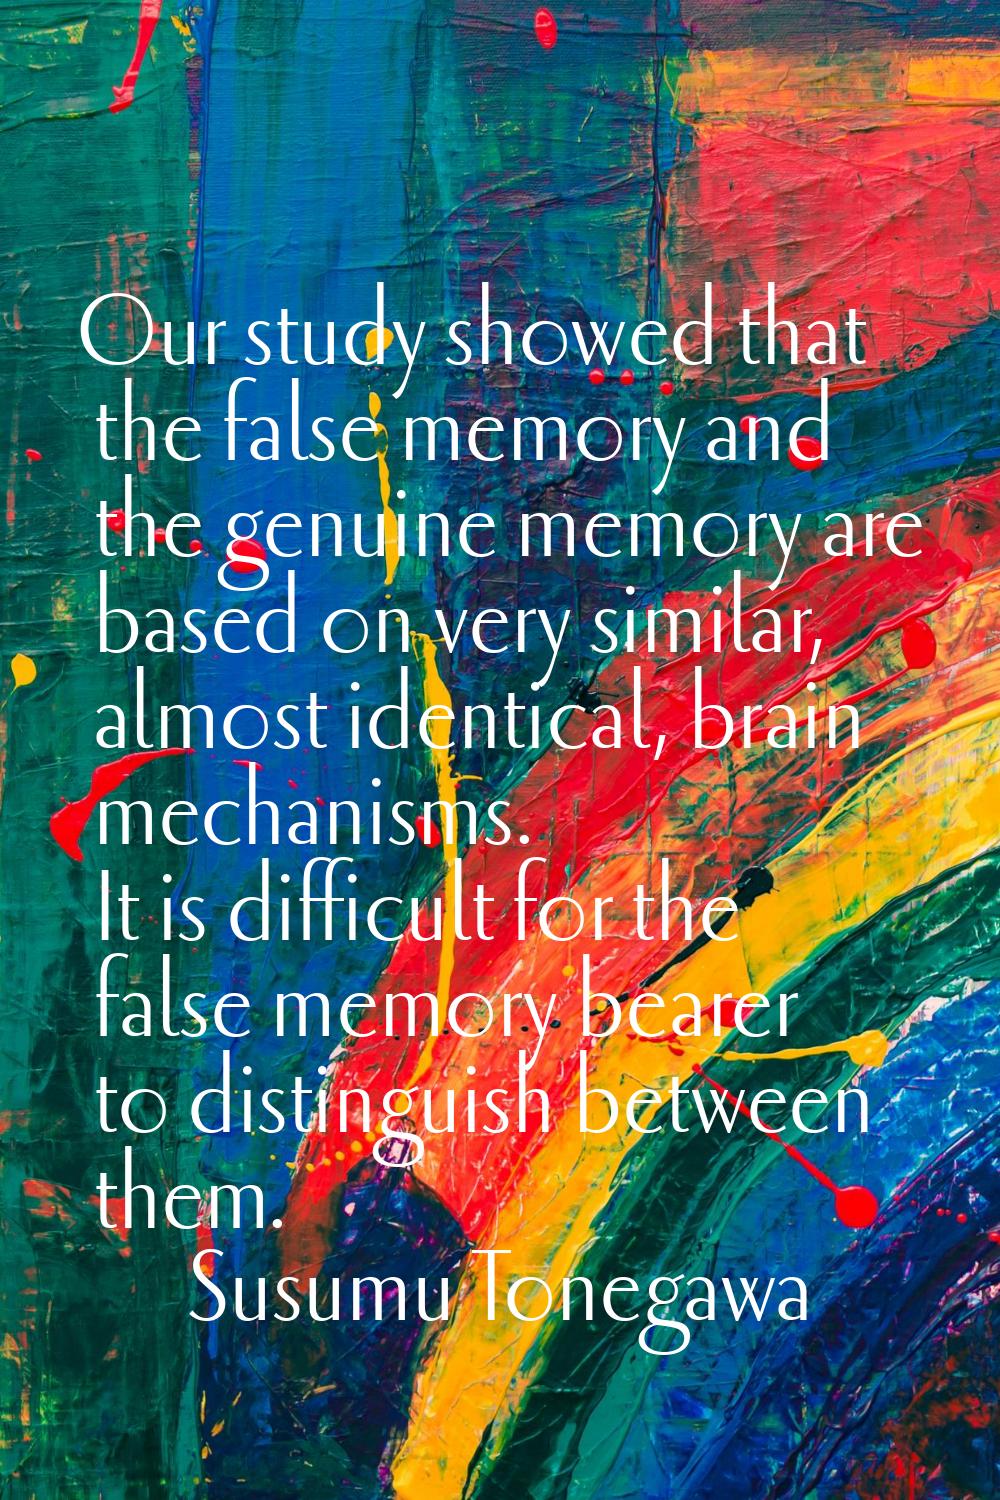 Our study showed that the false memory and the genuine memory are based on very similar, almost ide